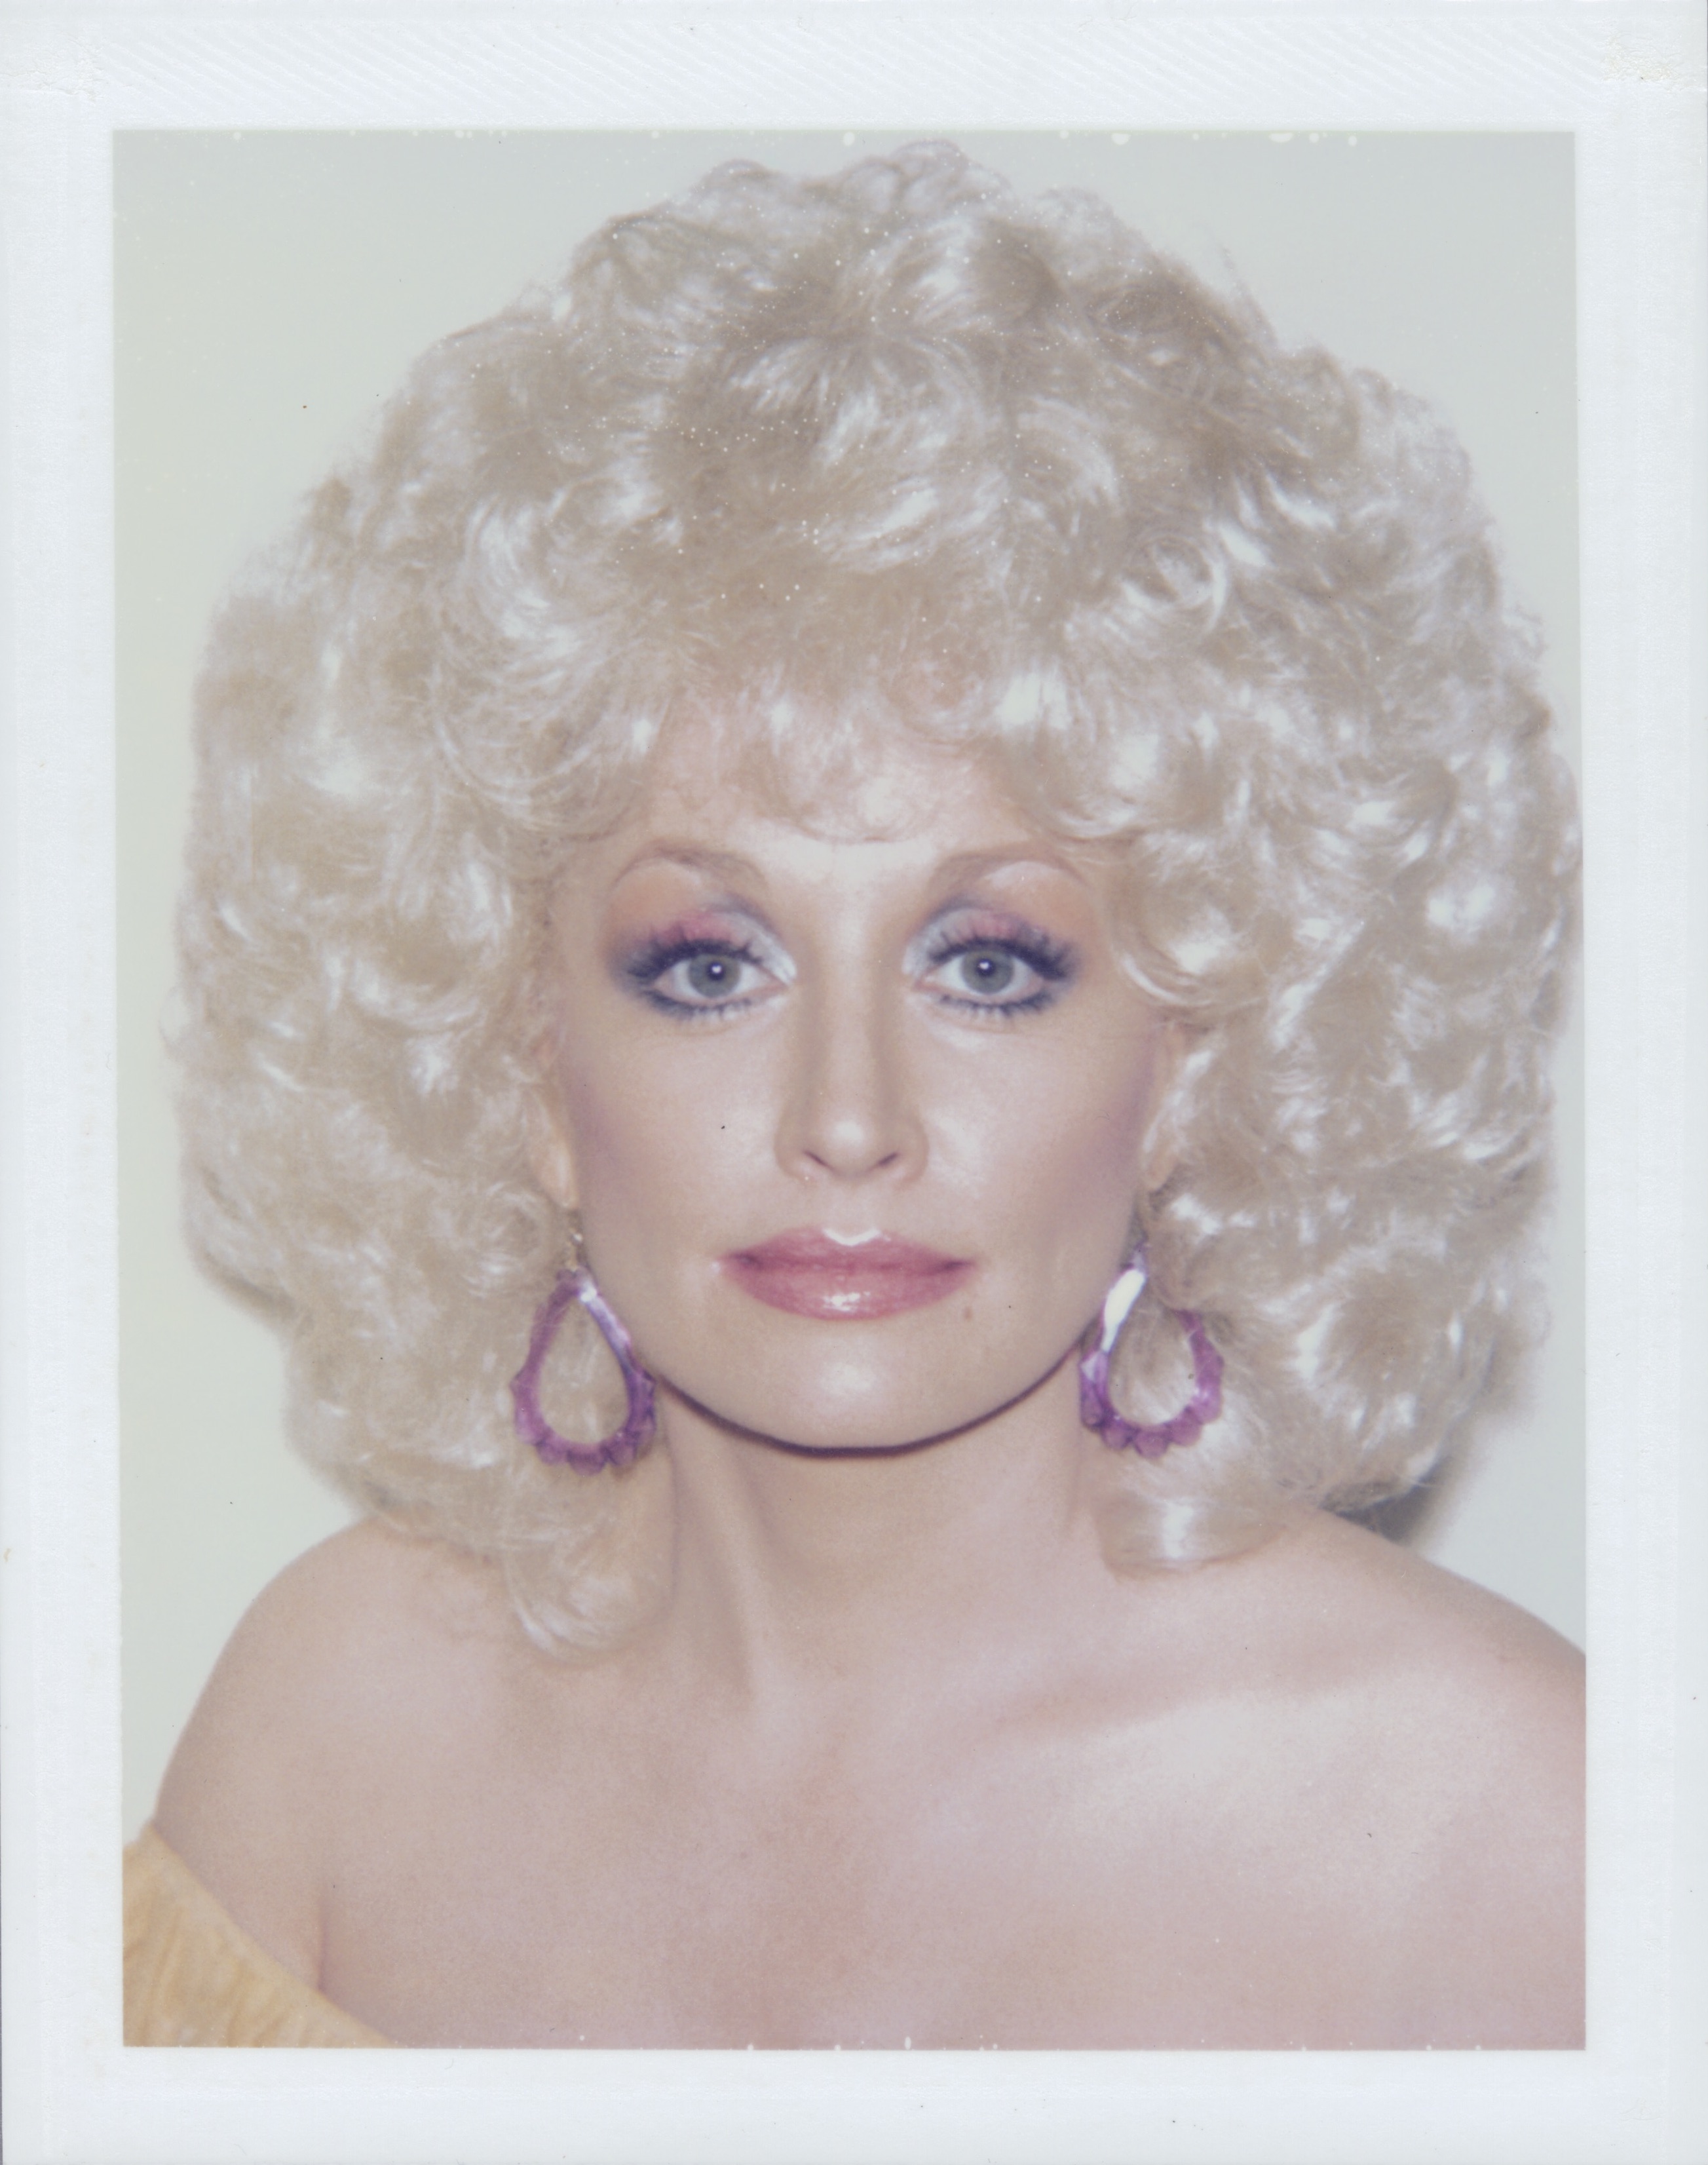 Dolly Parton, 1985 unique Polaroid print © The Andy Warhol Foundation for the Visual Arts, Inc. Licensed by Artists Rights Society (ARS), New York.